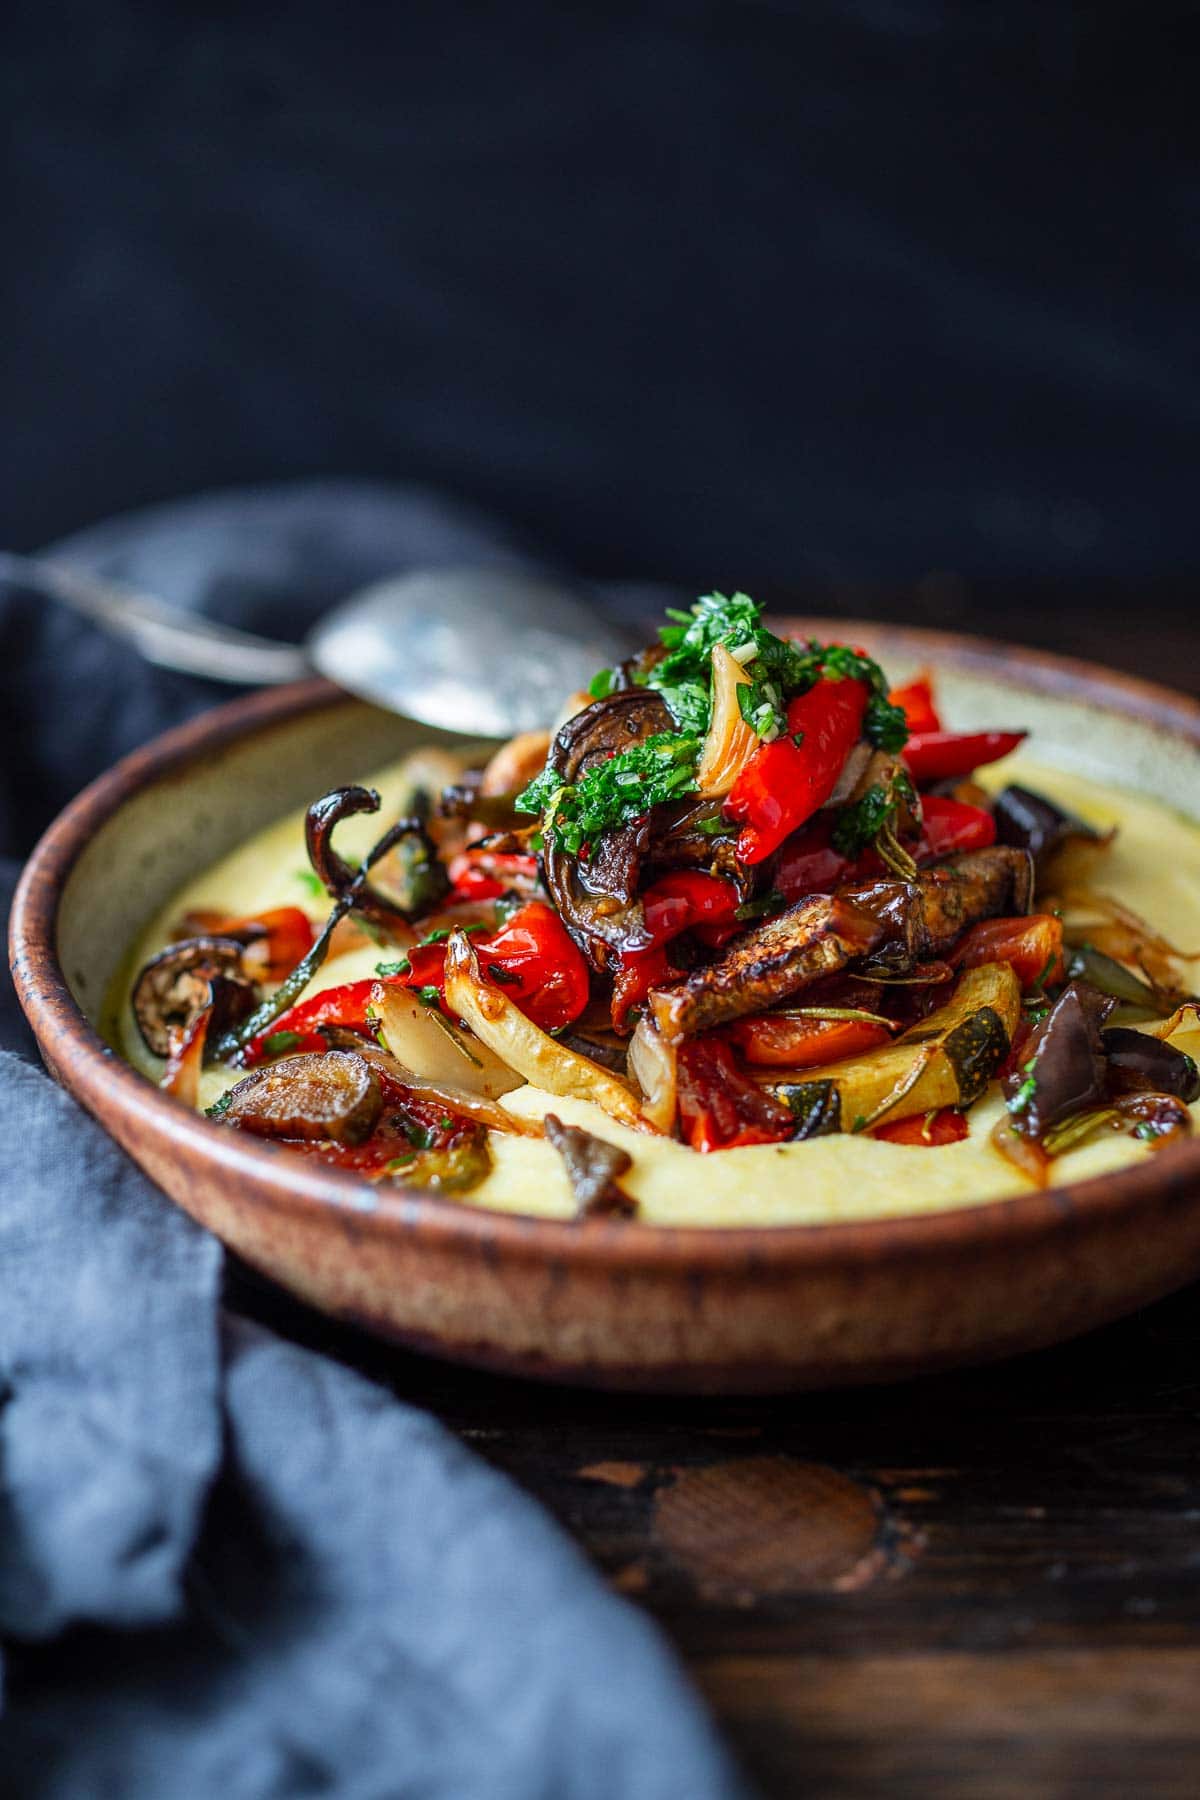 Ratatouille is a classic French dish from Provence made with eggplant, peppers, zucchini, tomatoes, onion, garlic, olive oil and herbs- a celebration of summer in one dish! Video.